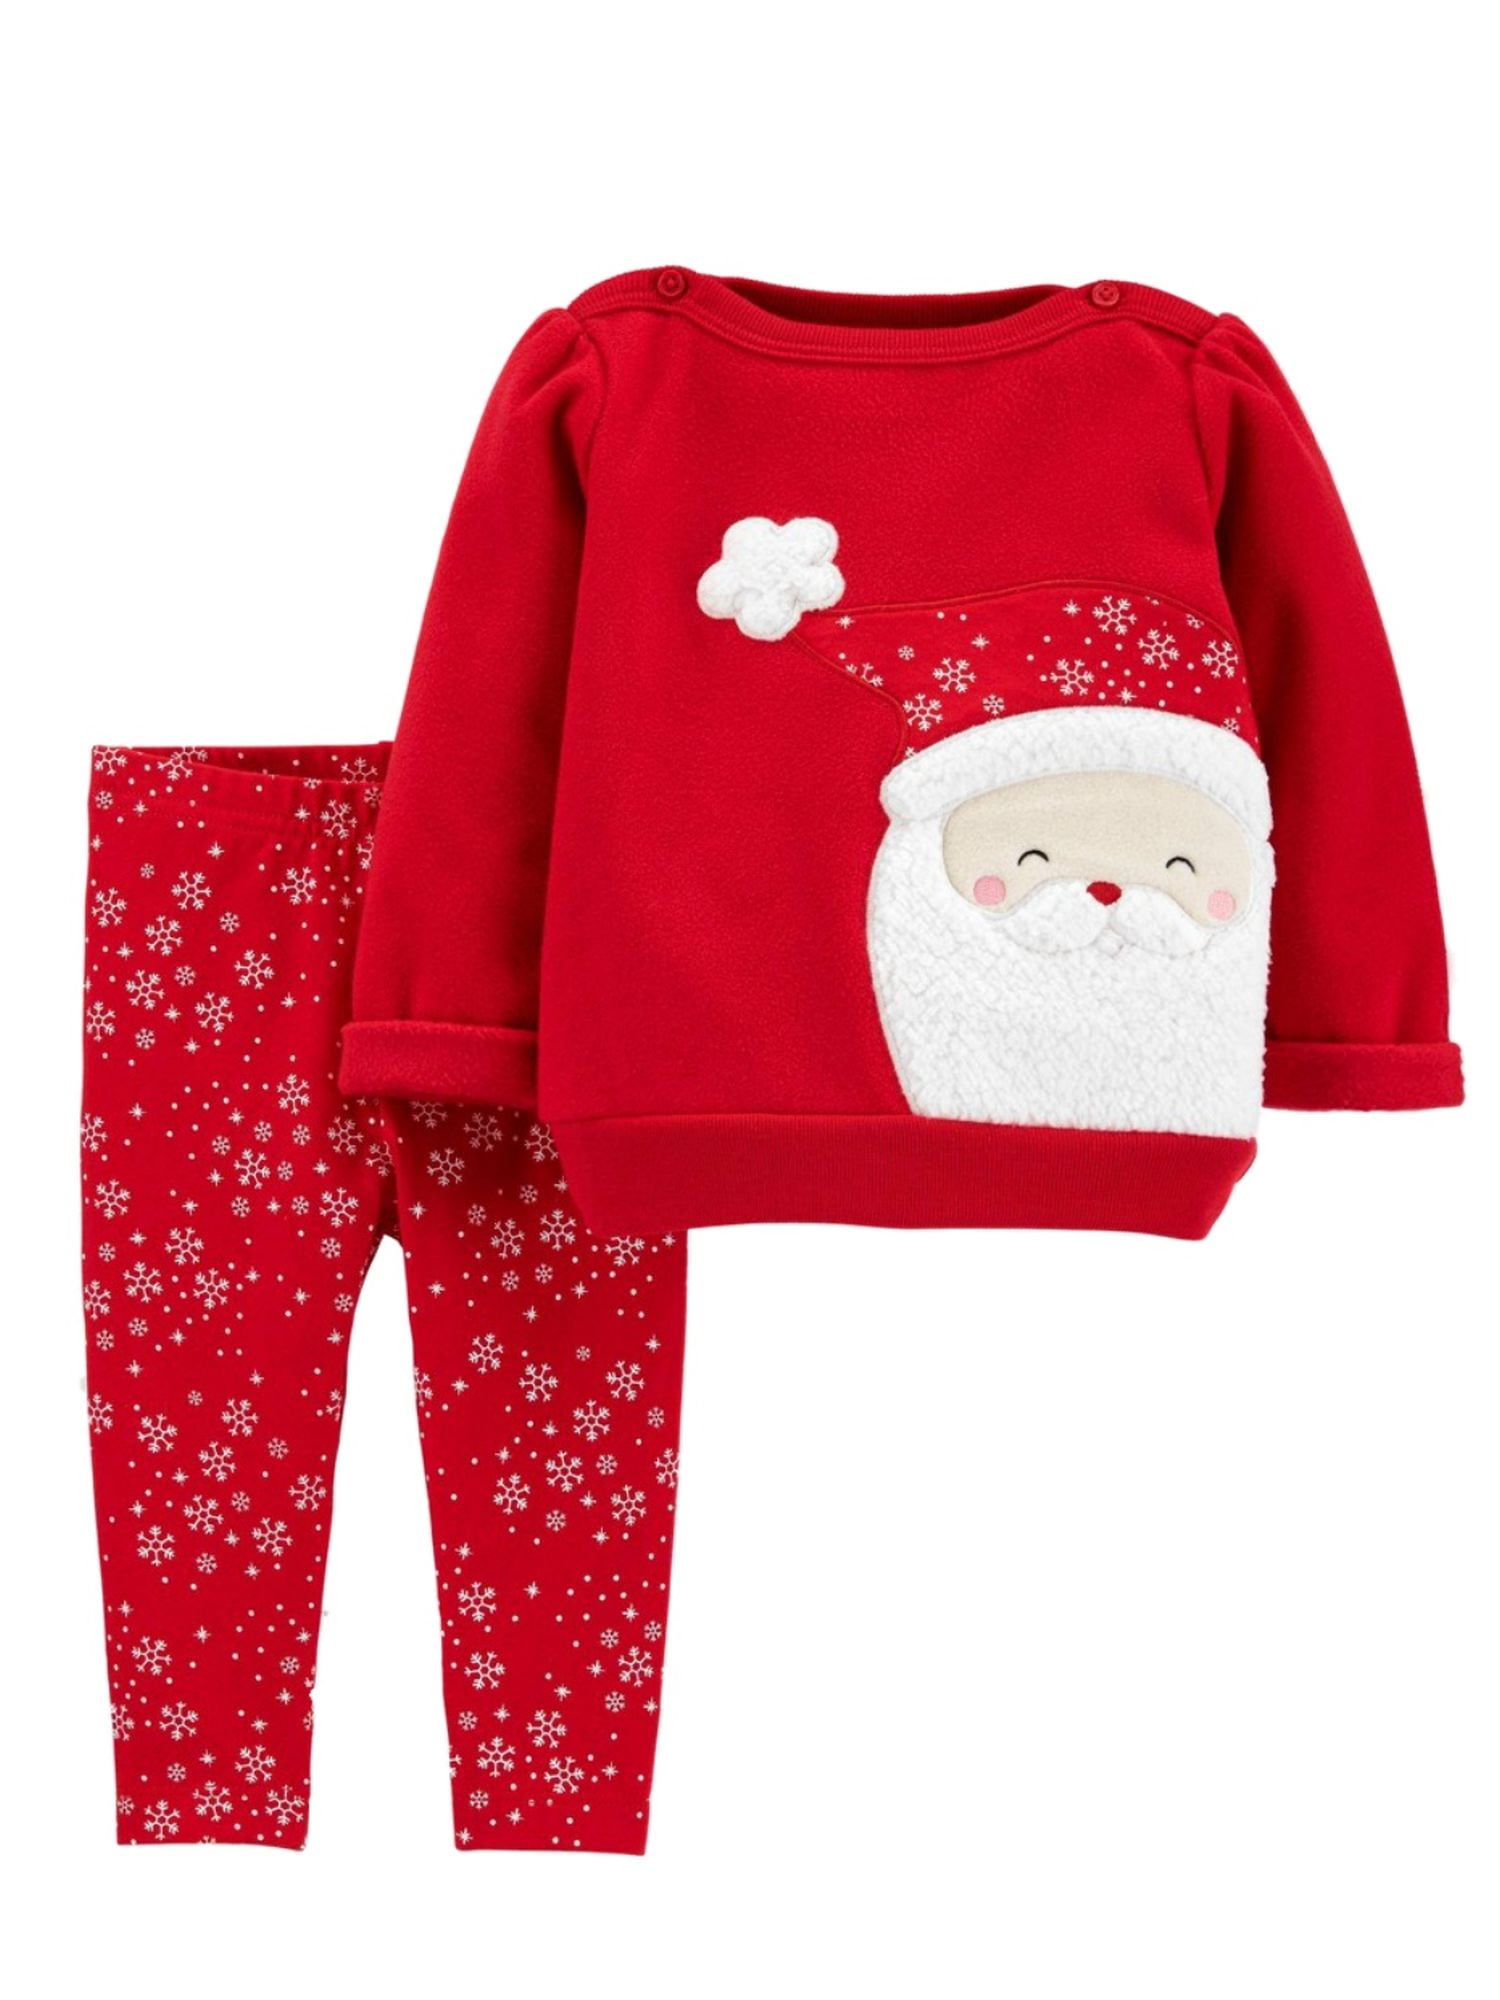 18 month 2 piece Carters Just One you Xmas Santa outfit Fleece xmas 